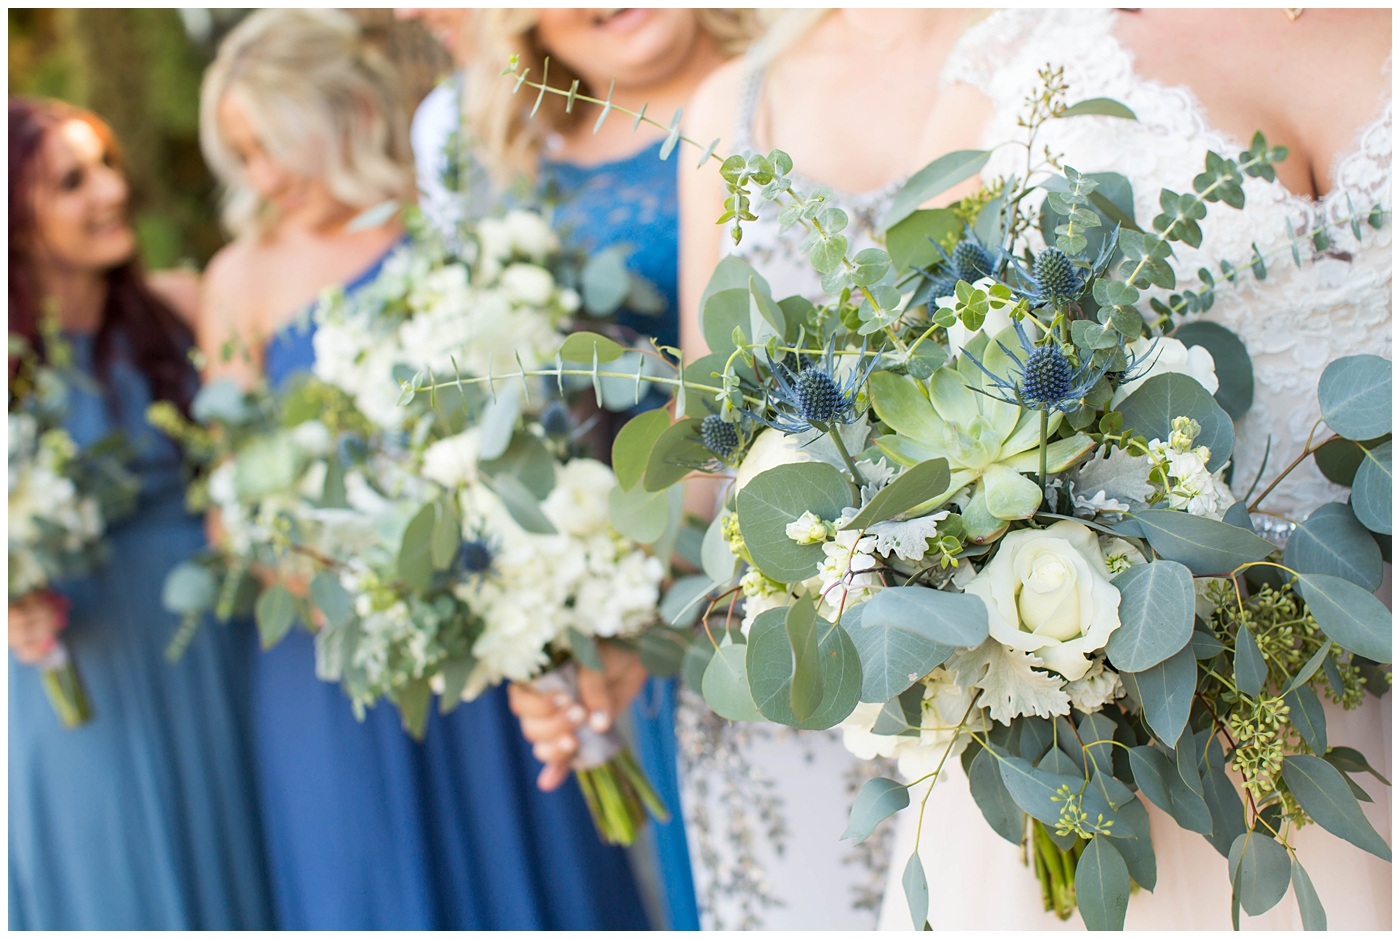 Wedding bouquets with succulents and greenery